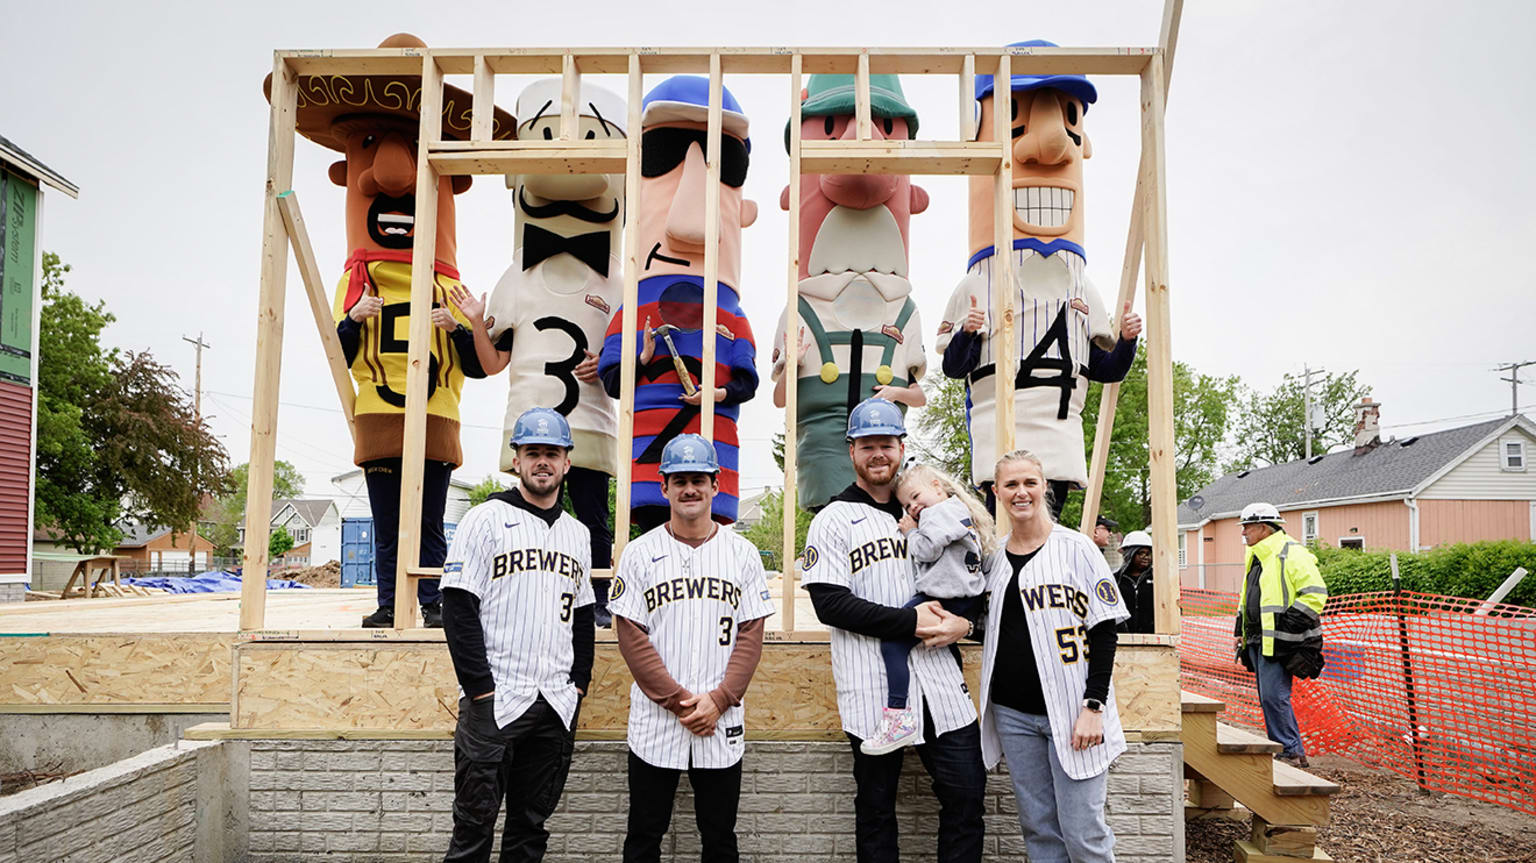 Brewers players pose for a photo wearing hardhats